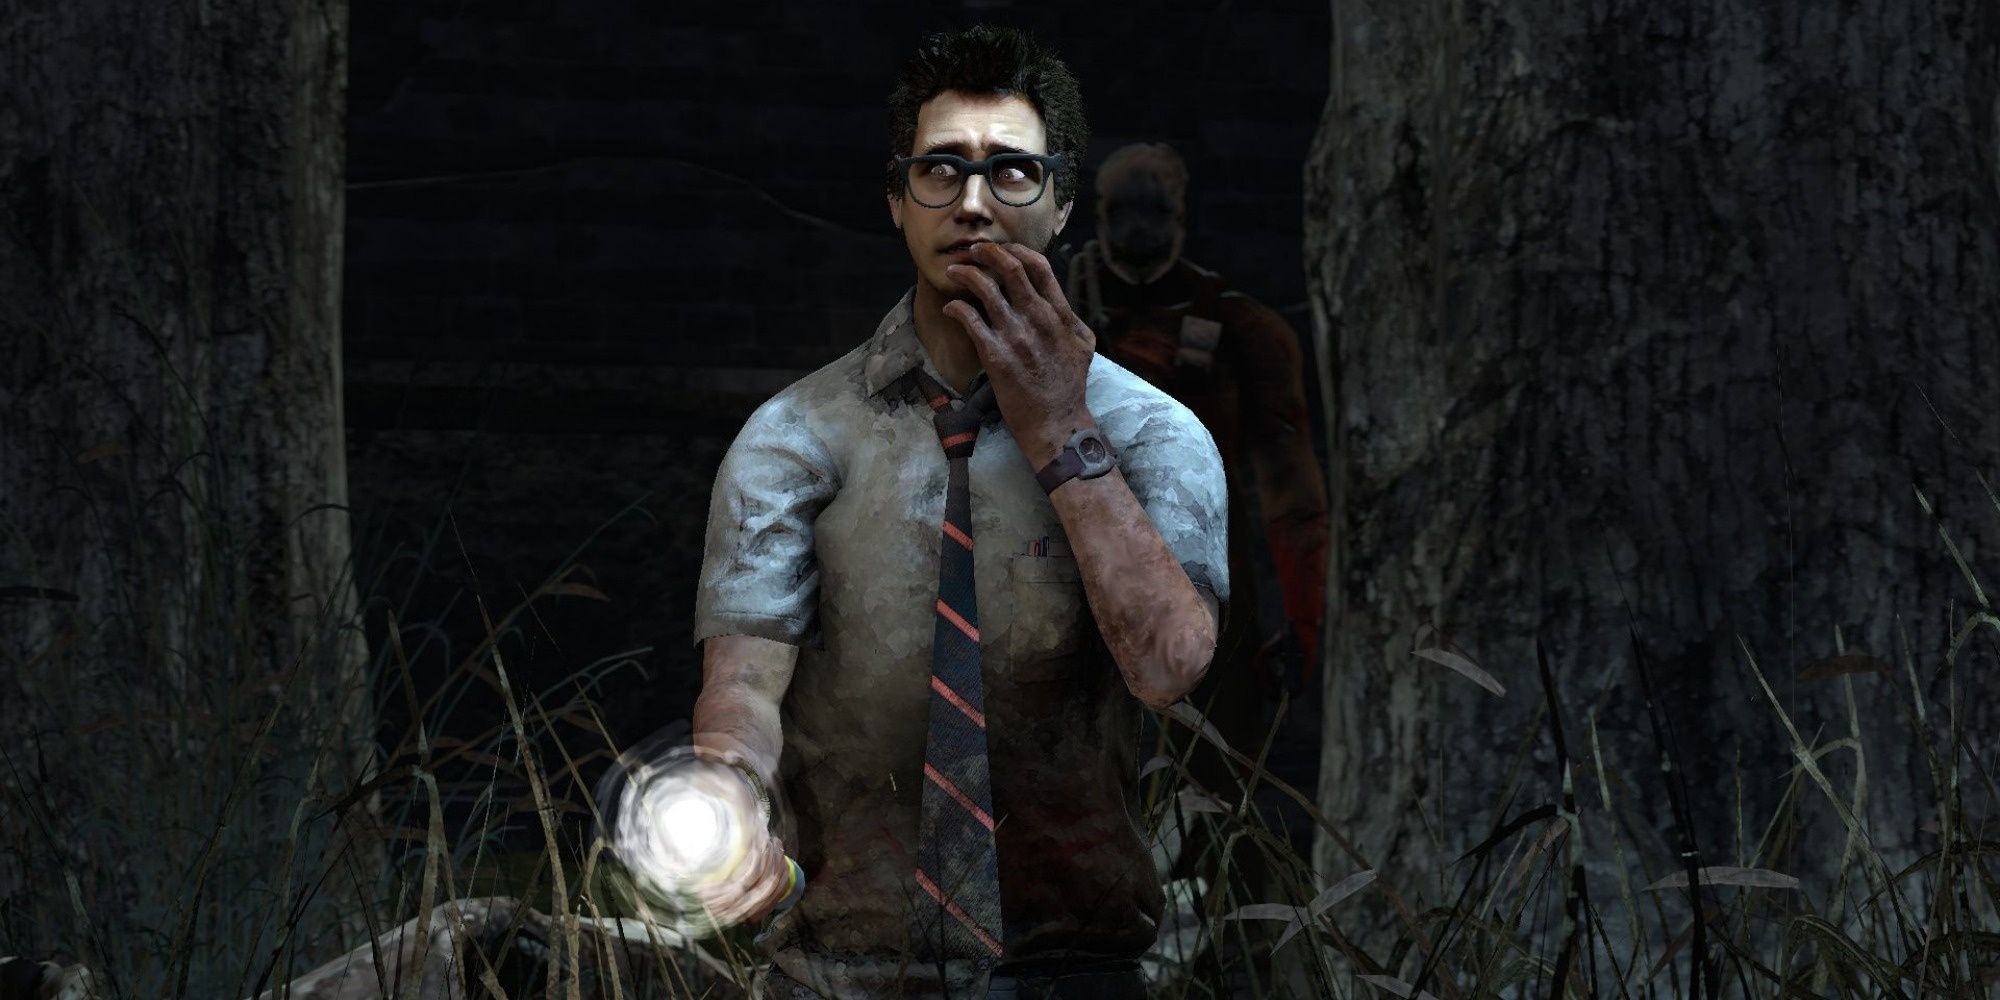 Dwight Fairfield being stalked by The Trapper in Dead By Daylight